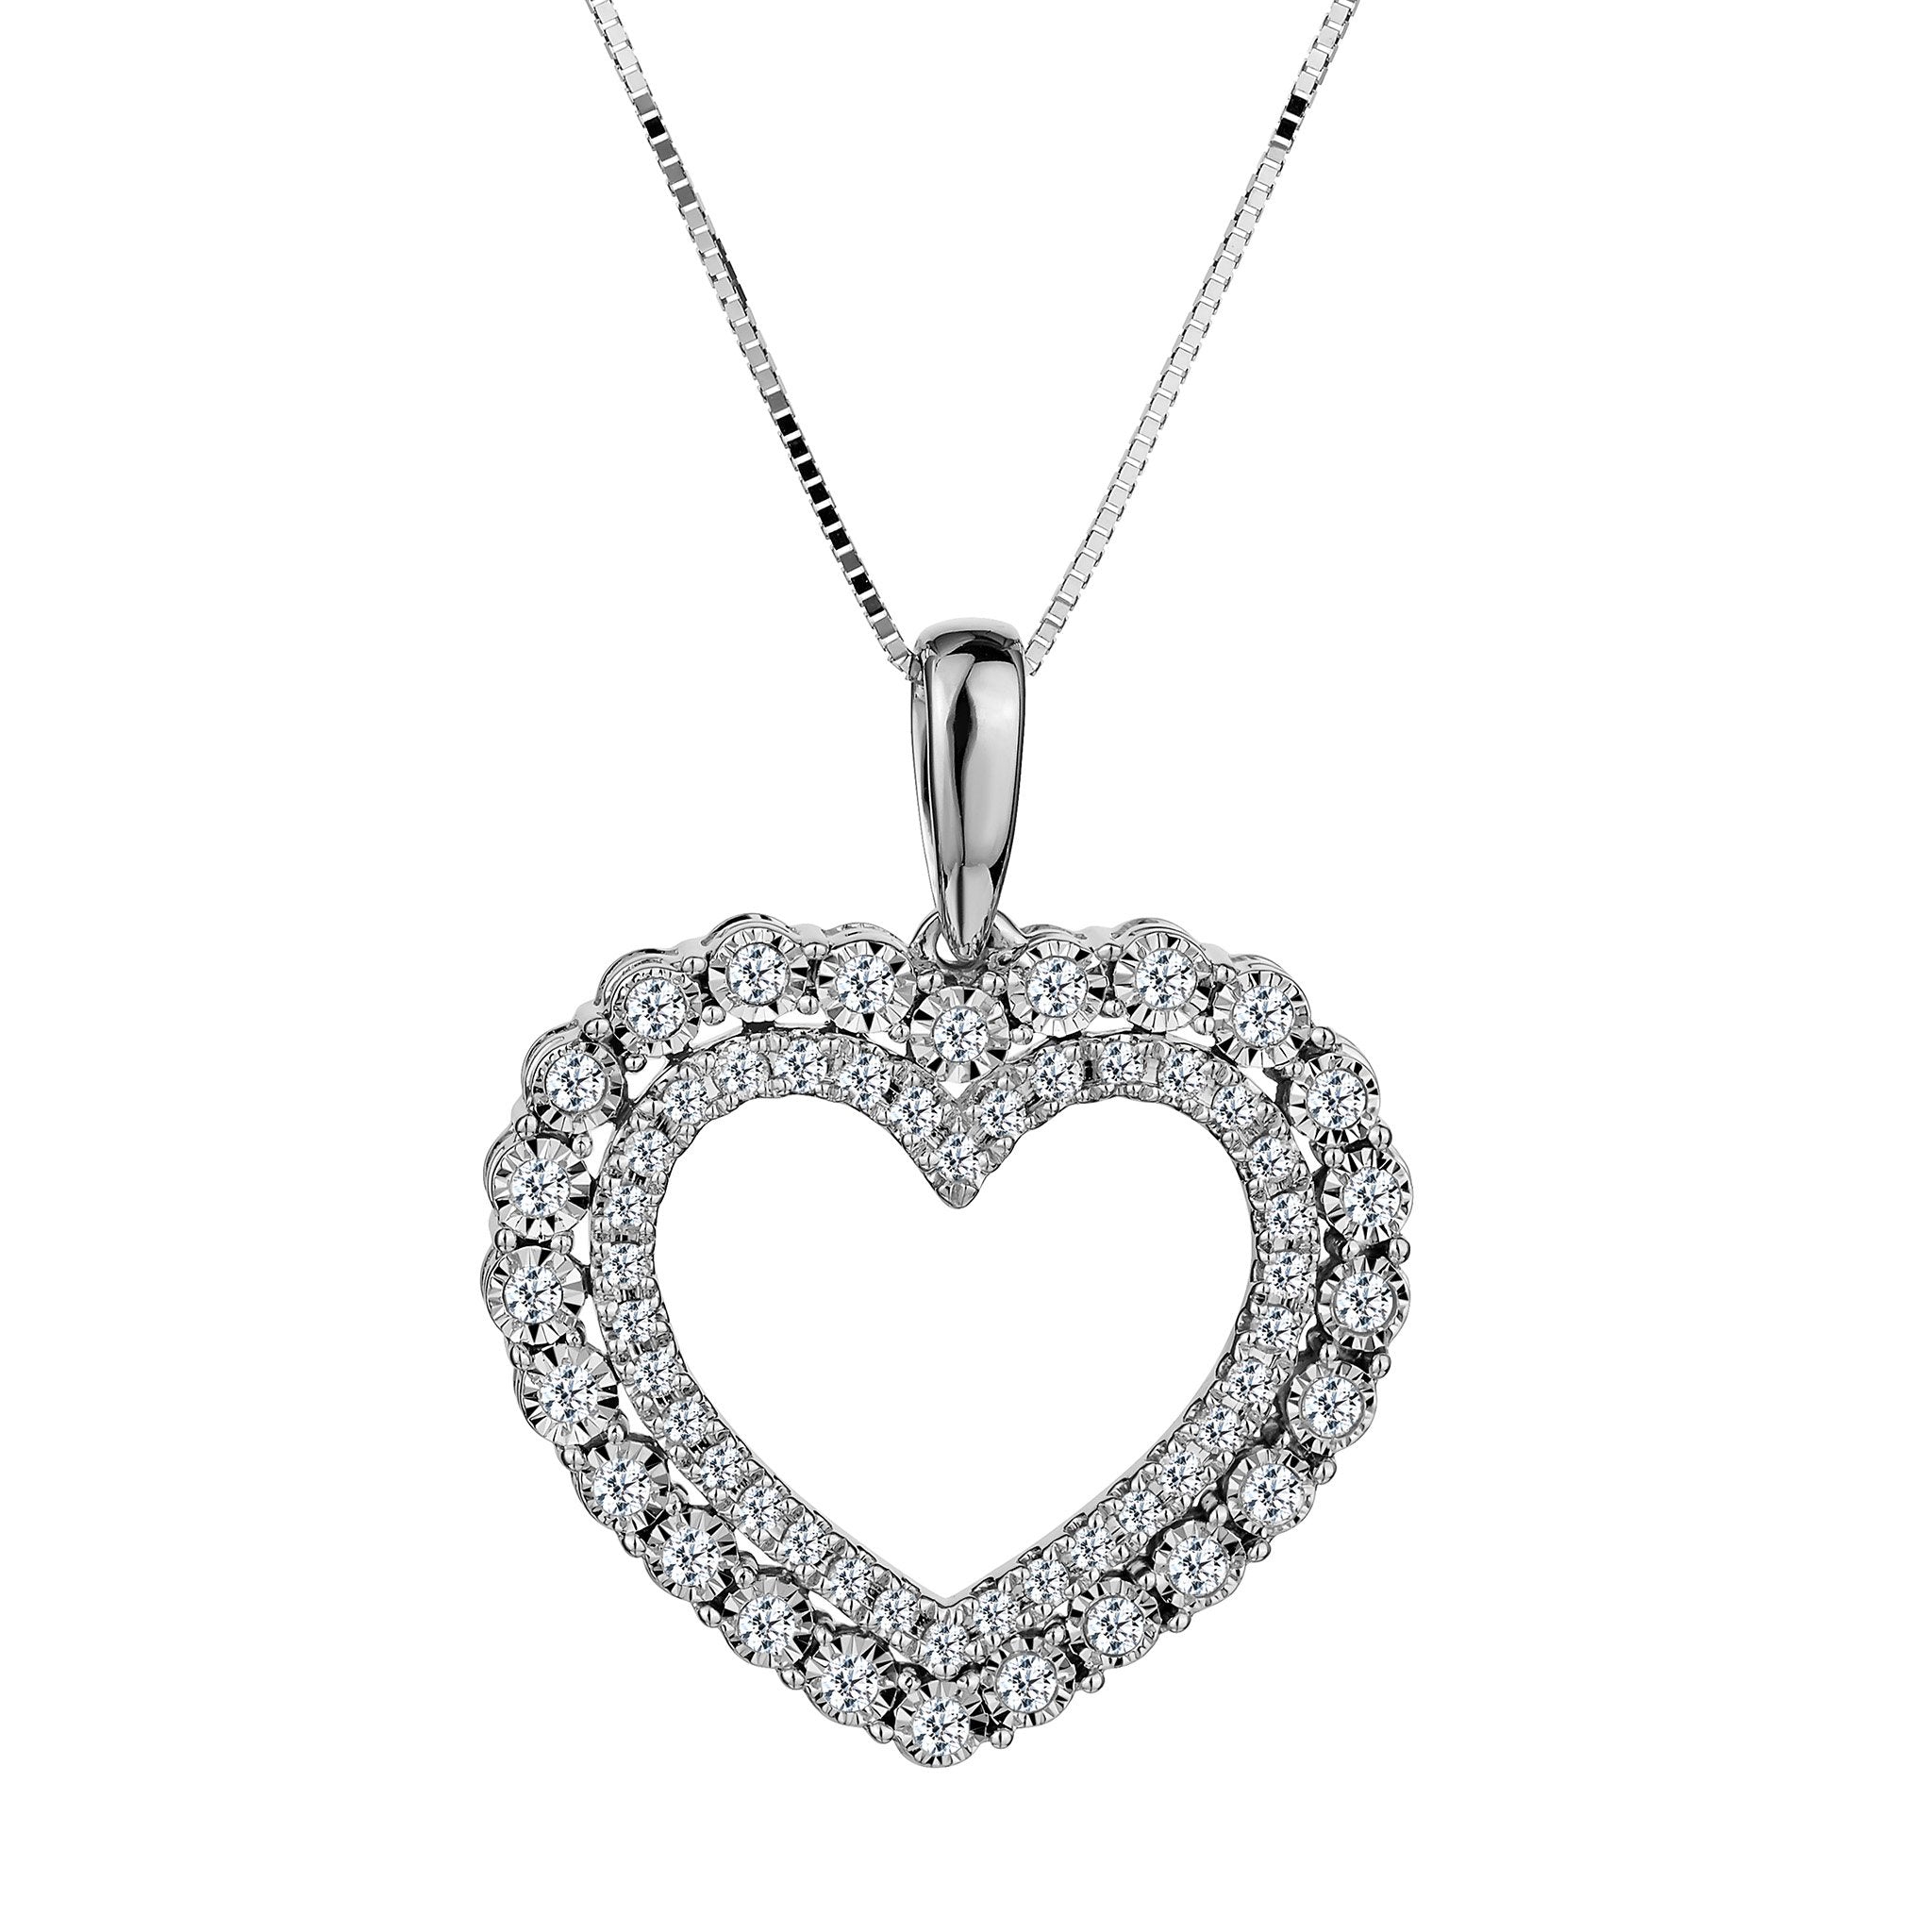 .53 Carat Diamond "Miracle" Pave Heart Pendant,  10kt White Gold. Necklaces and Pendants. Griffin Jewellery Designs. 